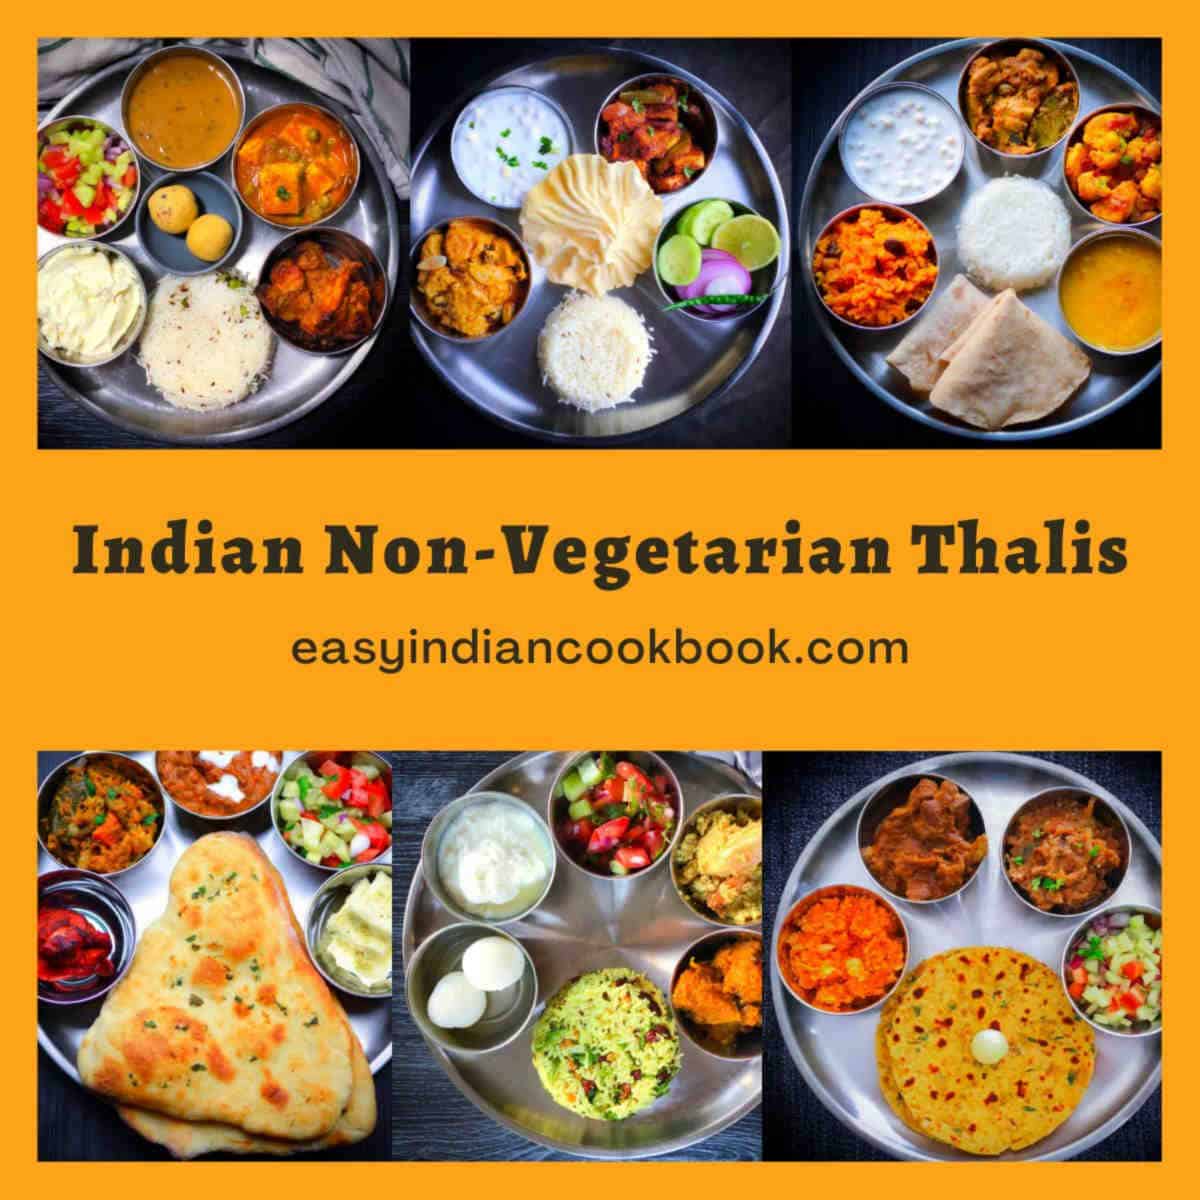 A 6-image collge of Indian non-vegetarial thalis.